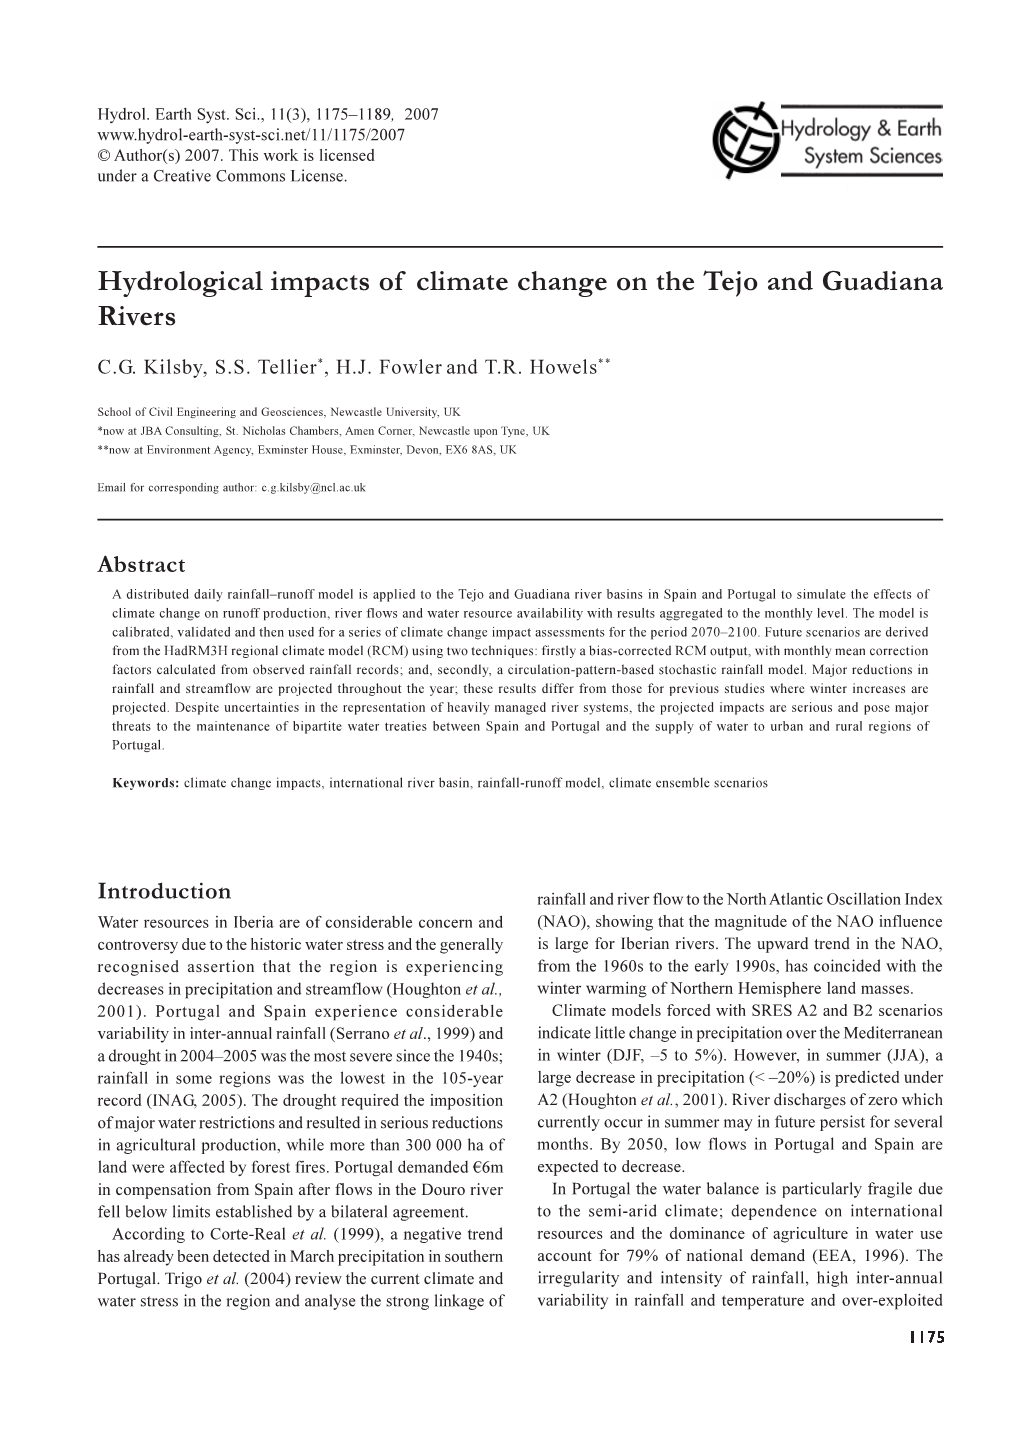 Hydrological Impacts of Climate Change on the Tejo and Guadiana Rivers © Author(S) 2007